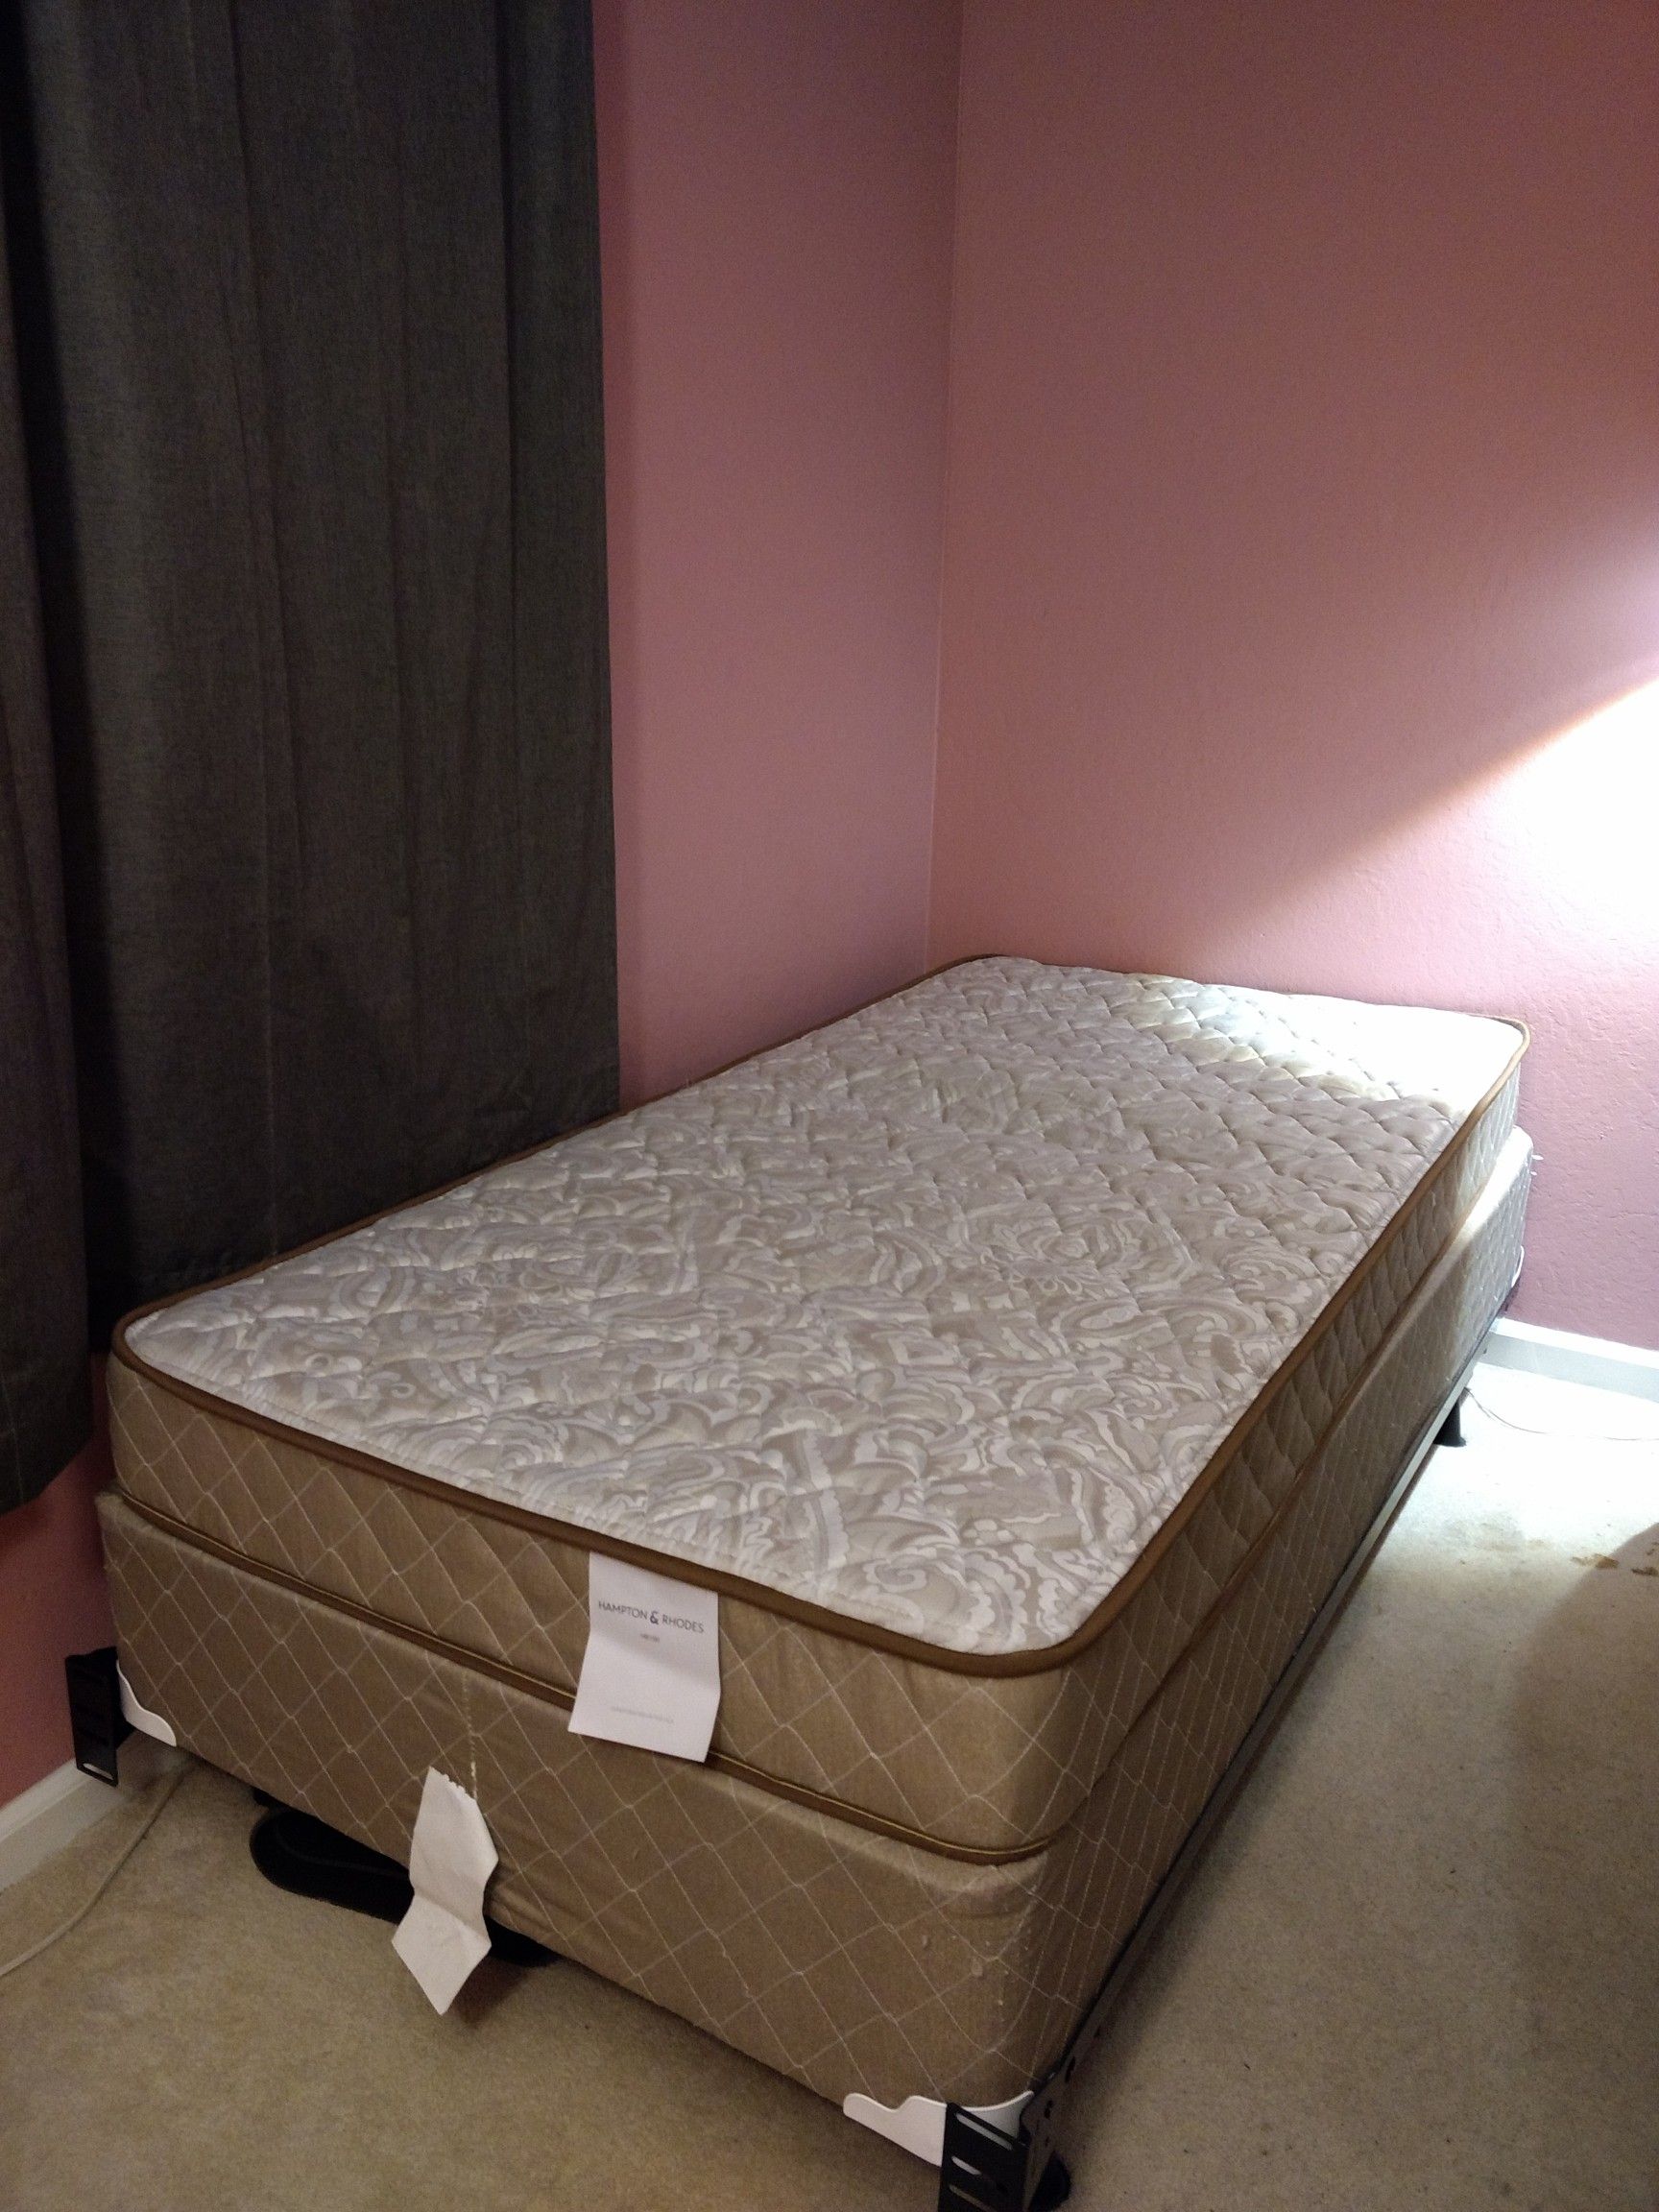 Bed, box spring and frame